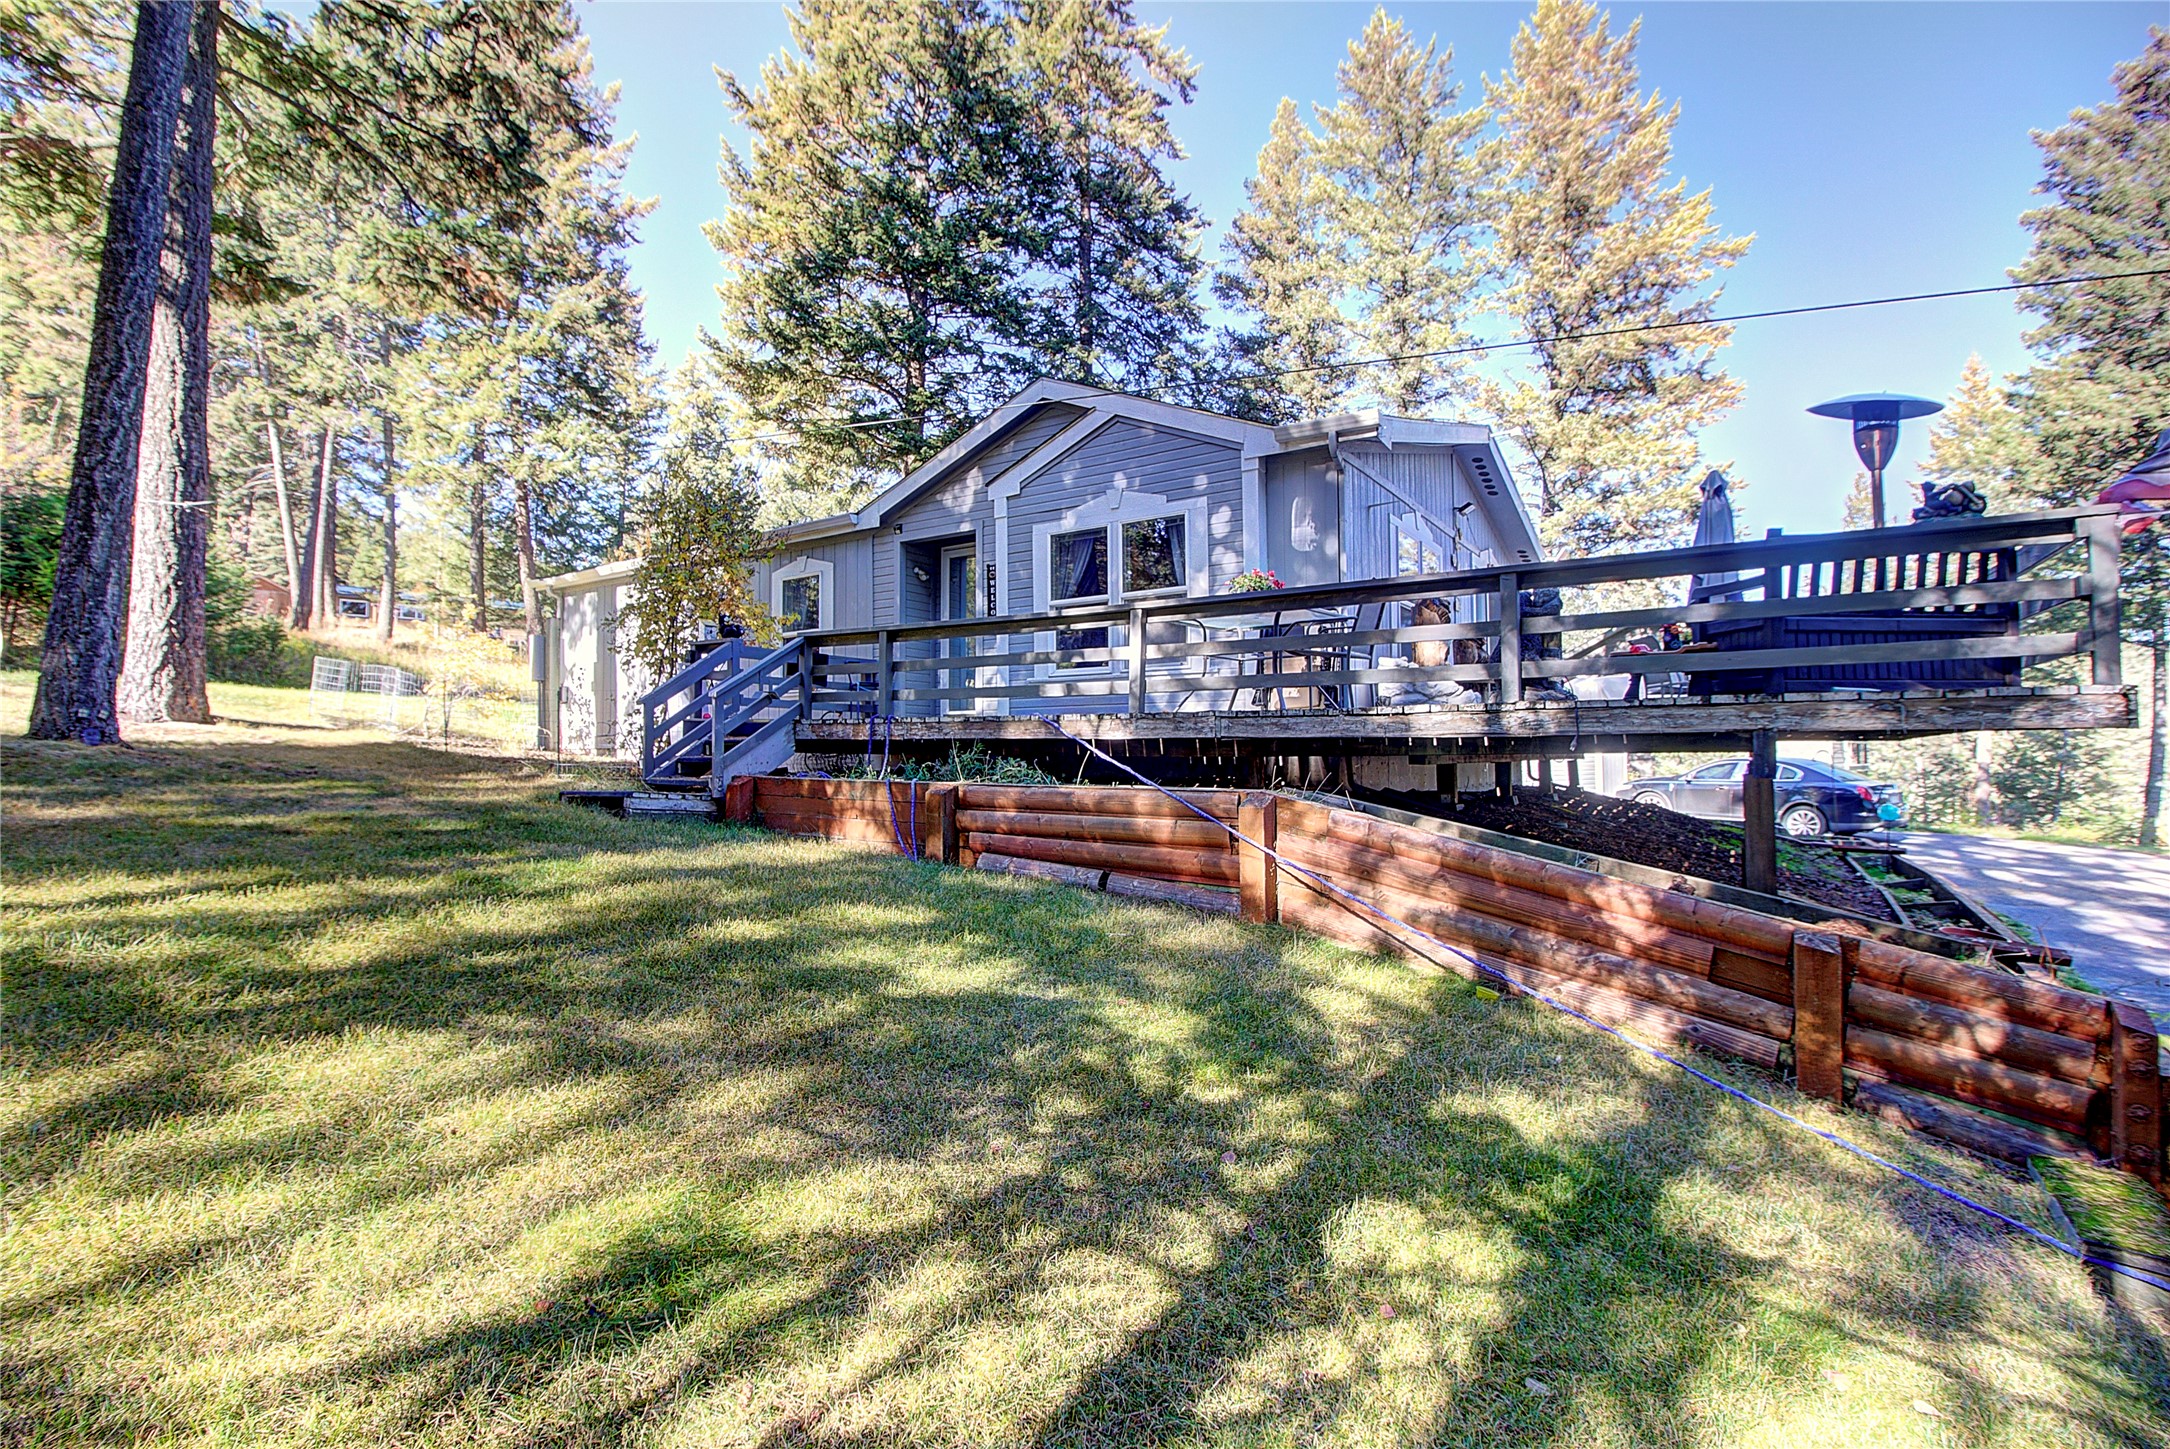 Great location in the heart of Lakeside with views of Flathead Lake very private with nice matures trees. Remodeled in about 2019. Is a 3 bedroom, 2 bath manufactured home on a permanent foundation. ( 3 bedroom does not have closet) Granite bathroom countertops, concrete kitchen countertops, double pane windows throughout, large deck on three sides. Detached 2 car garage plus nice storage shed all on 0.57. Only minute's to Flathead Lake and BlackTail ski Resort. MOTIVATED SELLER,will include Four-Wheeler and snowplow in the sale. Call Cindy Lanier at 406 250-5273 or your real estate professional.